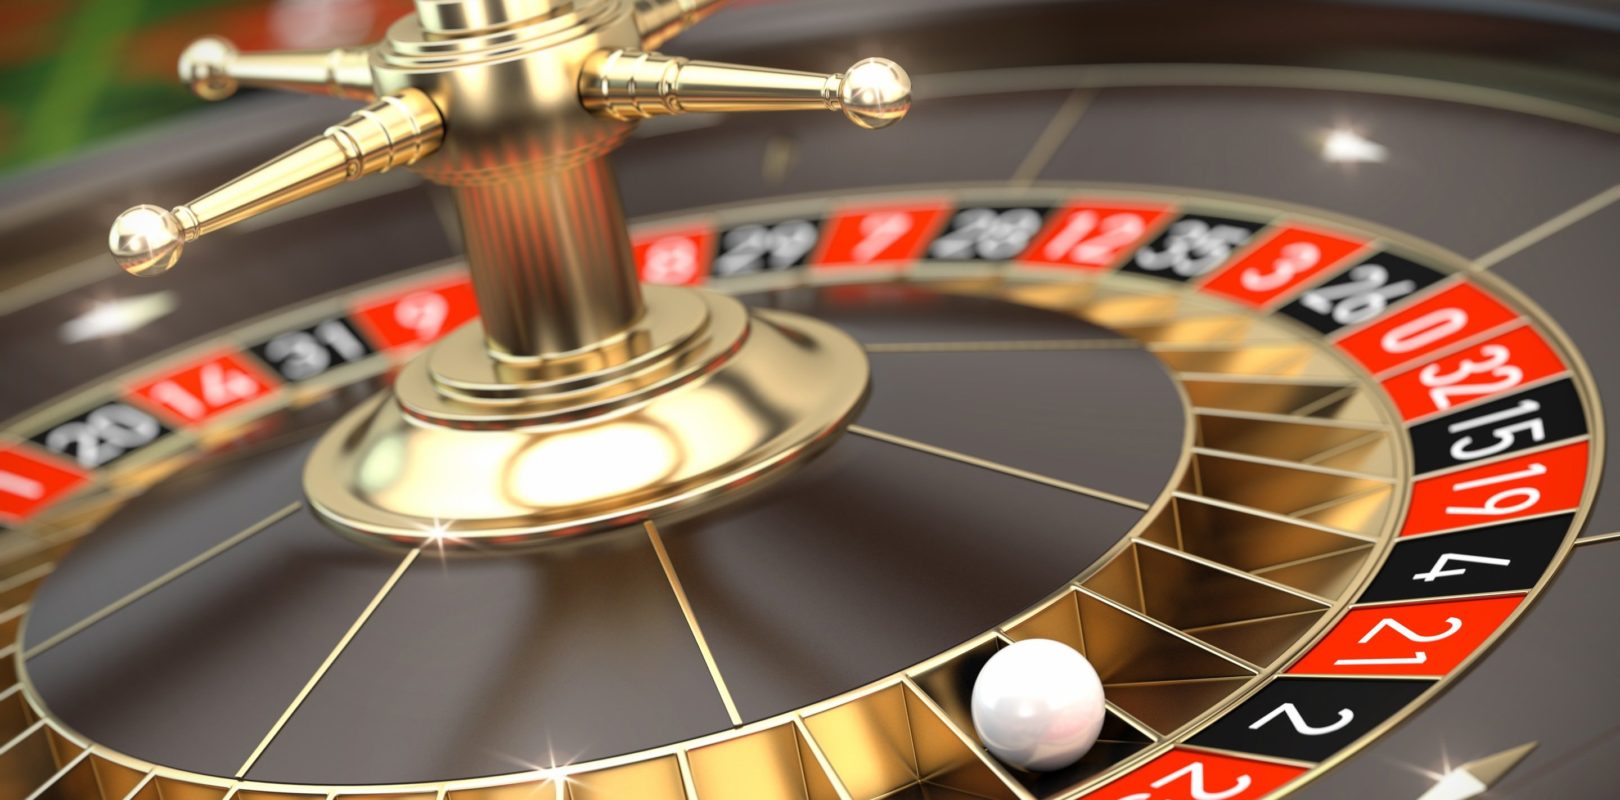 Casino Methods For The Entrepreneurially Challenged